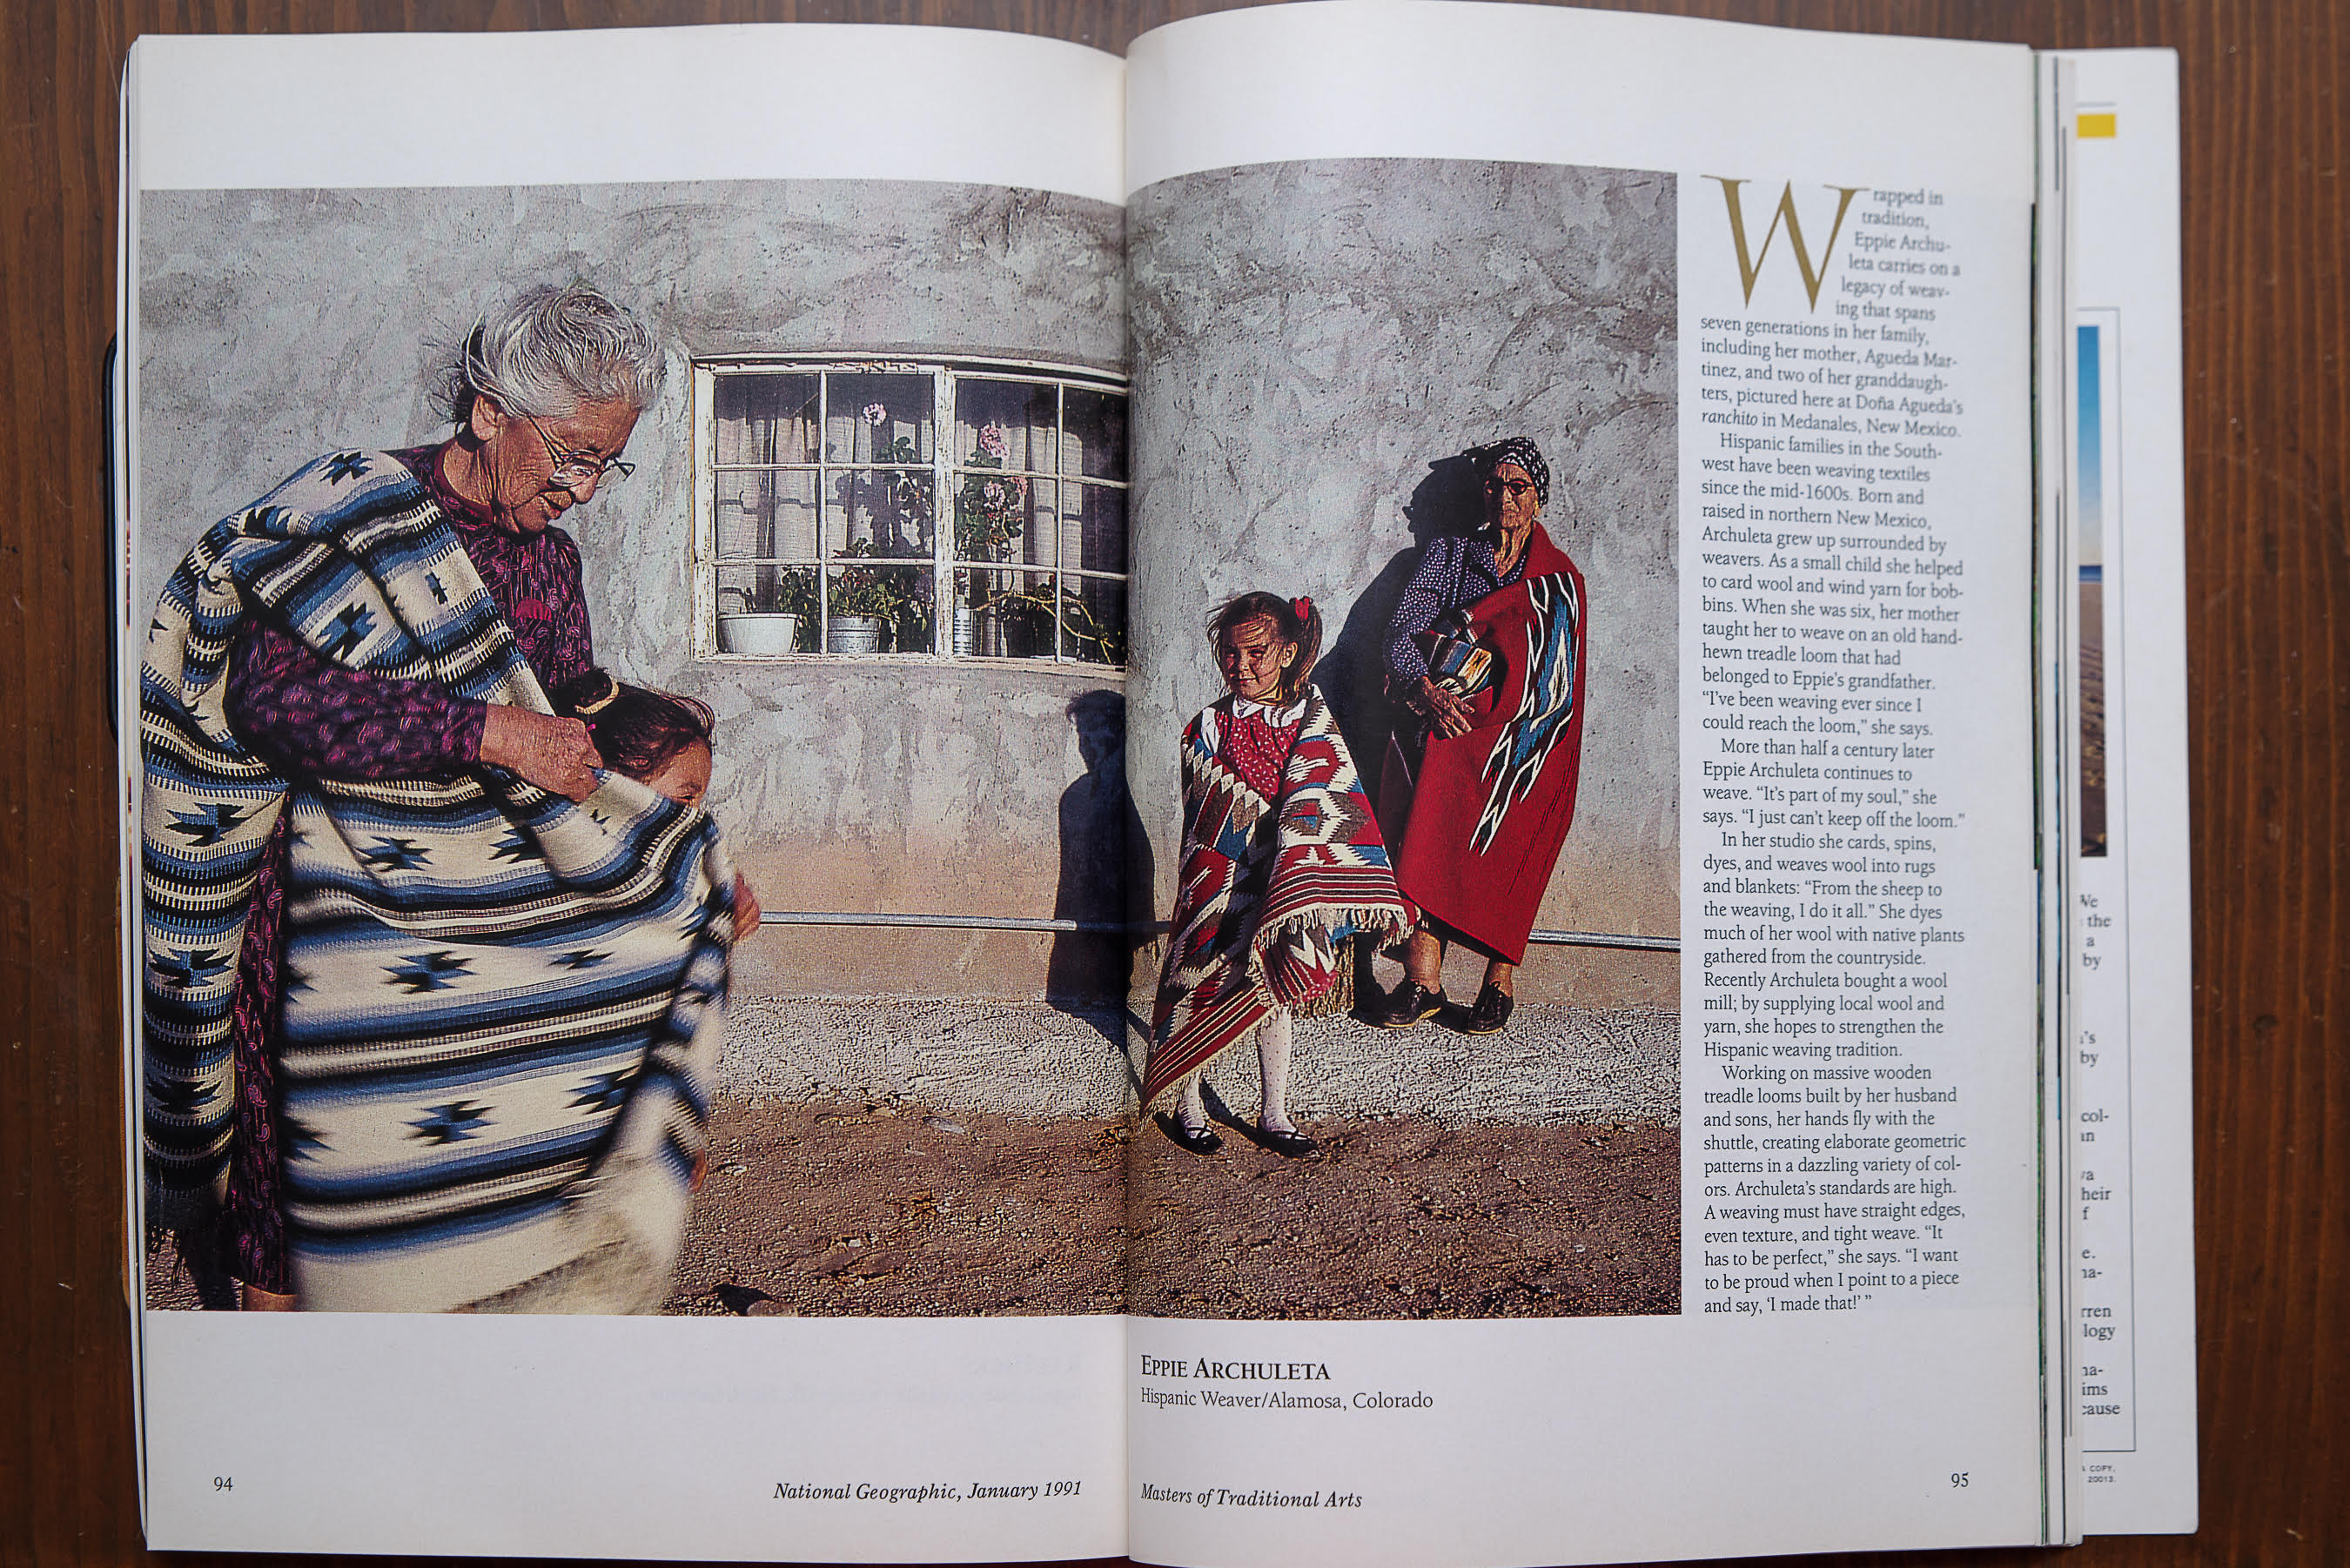 Photo of a magazine, opened to show a large photo across two pages. The photo is of Eppie Archuleta standing with her granddaughter, a woven blanket over Eppie's right shoulder and wrapping around the young girl in front of her. They are standing outside of a white-walled building with a paned window, near where another older woman and young girl both stand, with blankets of red and turquoise wrapped around them.